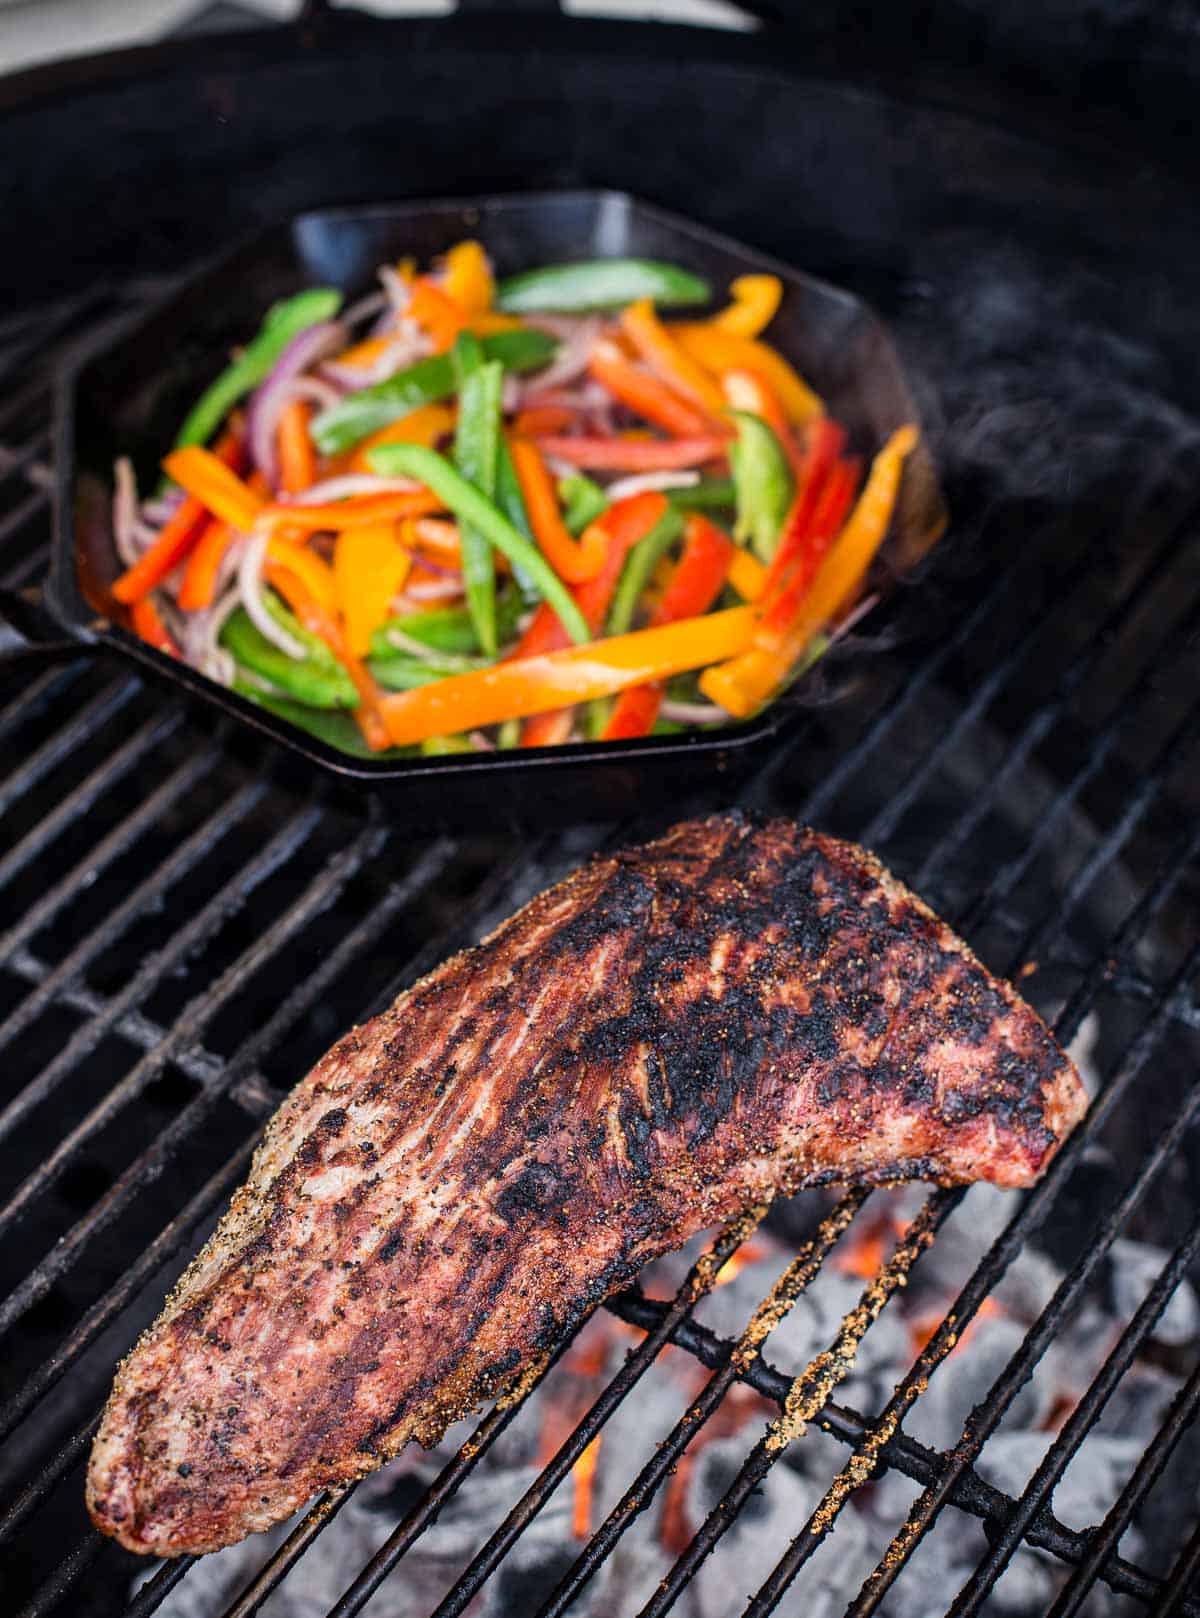 Tri tip and tint iron pan of onions and peppers for steak fajitas.